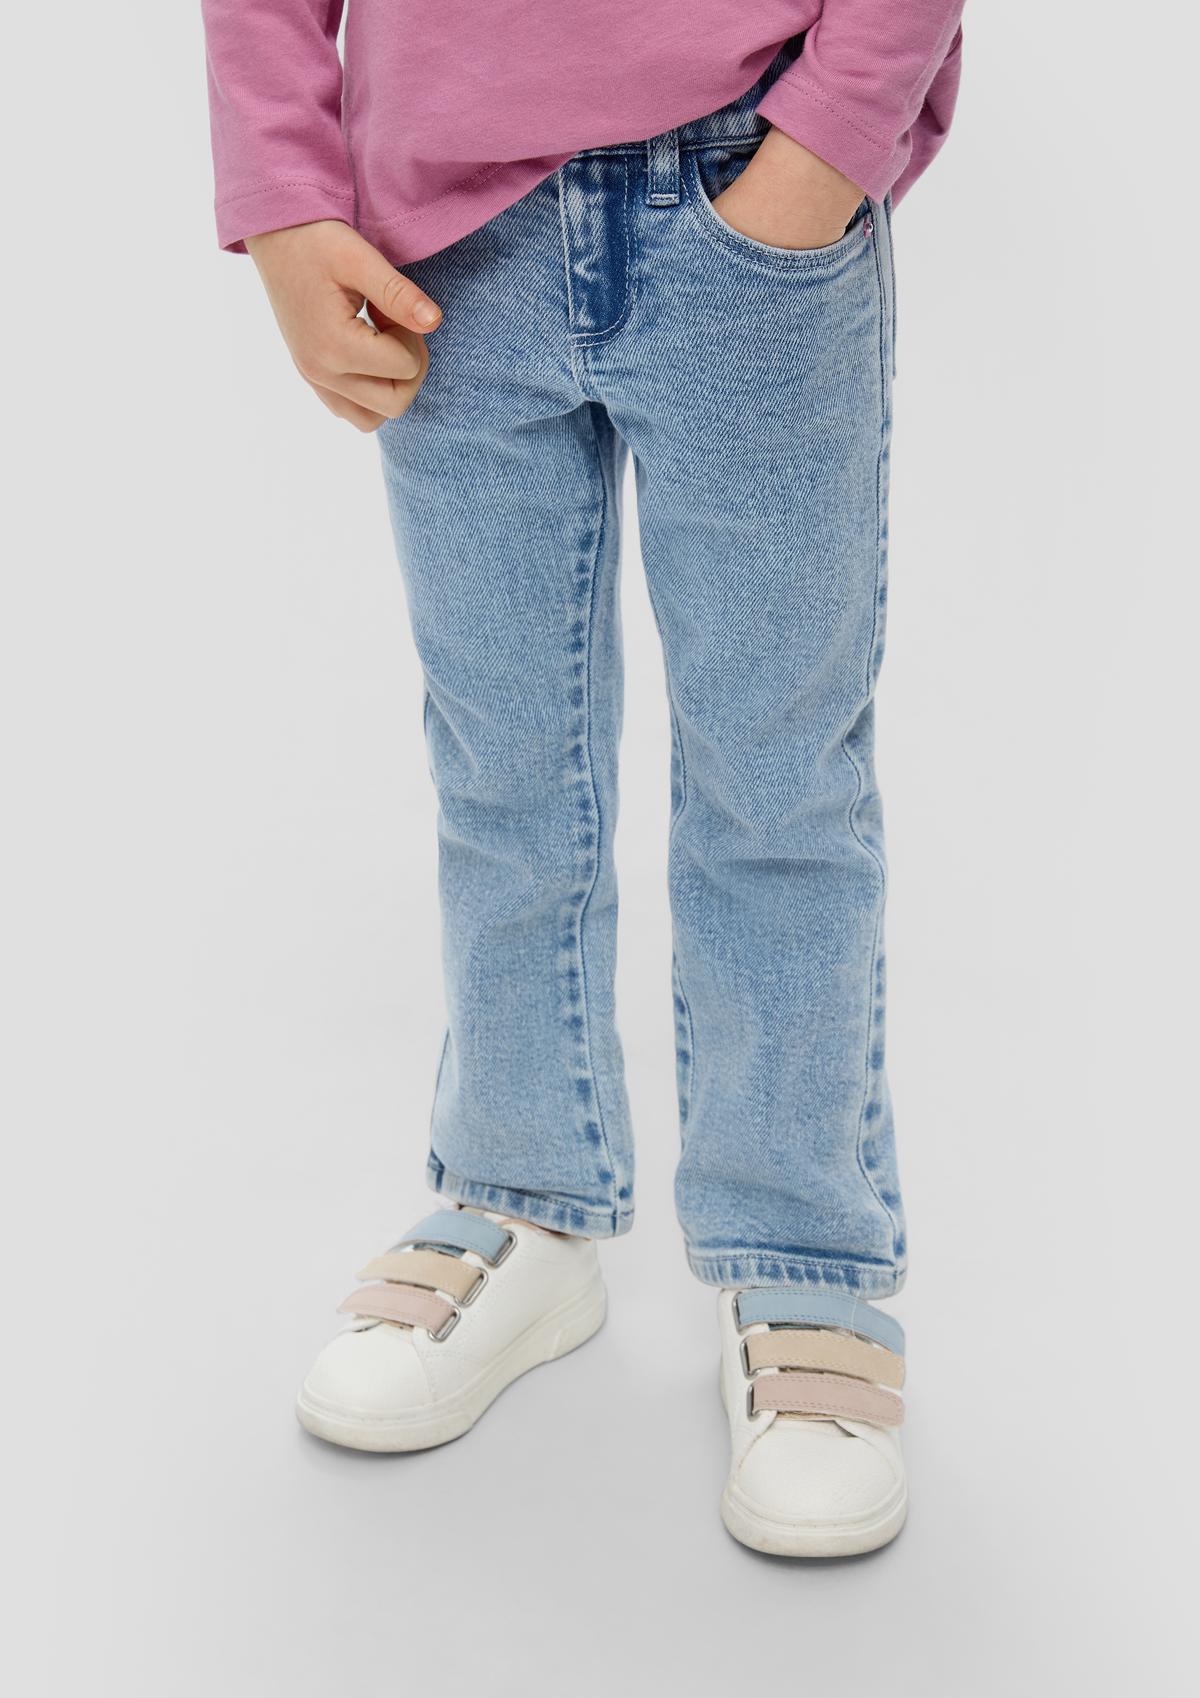 Jeans Betsy / Regular Fit / Mid Rise / Flared Leg